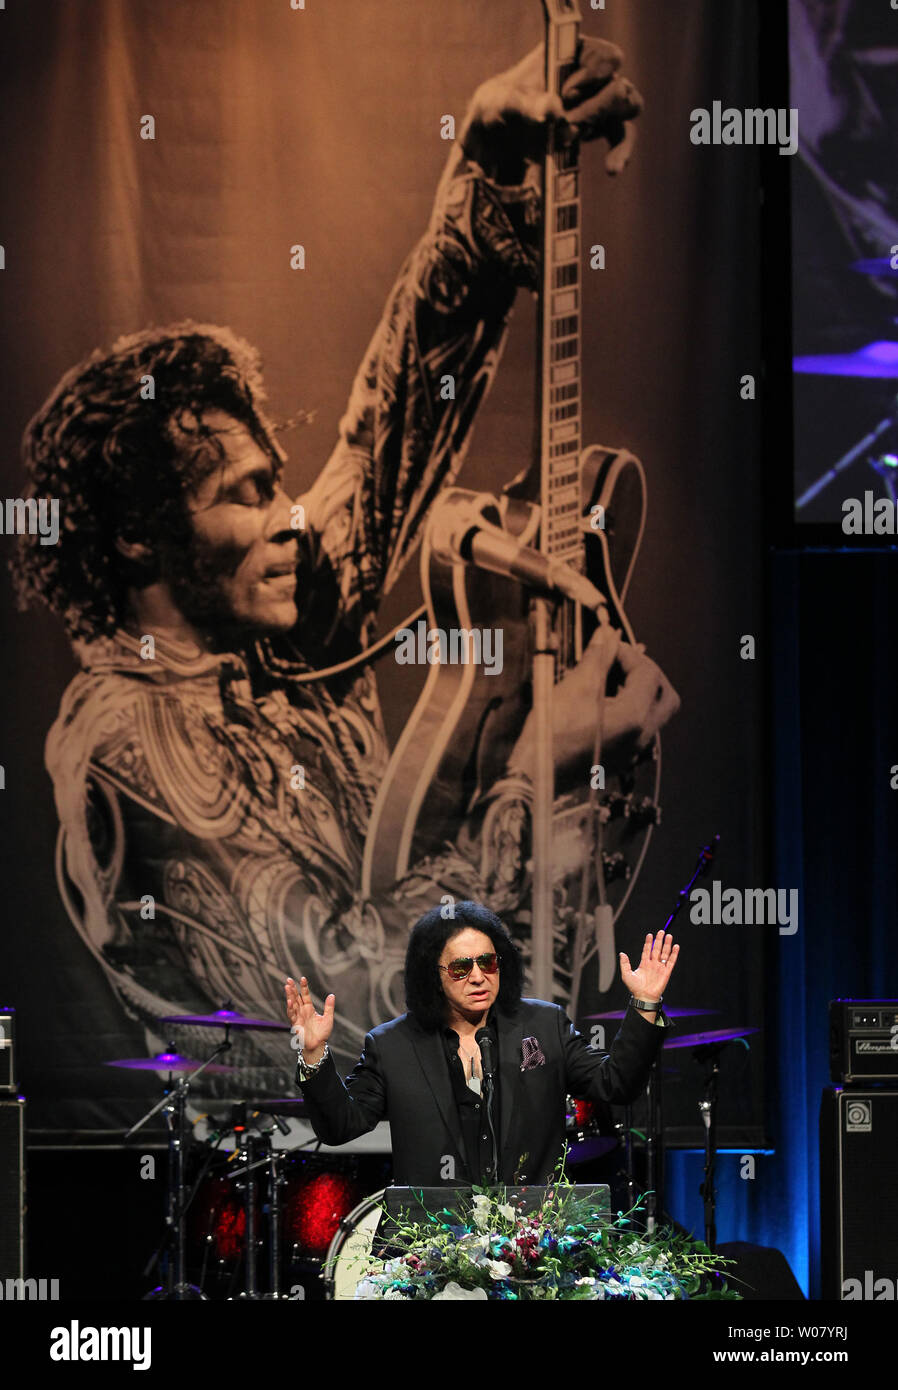 Kiss band member Gene Simmons makes his remarks during a memorial service  for the late rock and roller Chuck Berry at the Pageant Theater in St.  Louis on April 9, 2017. Berry